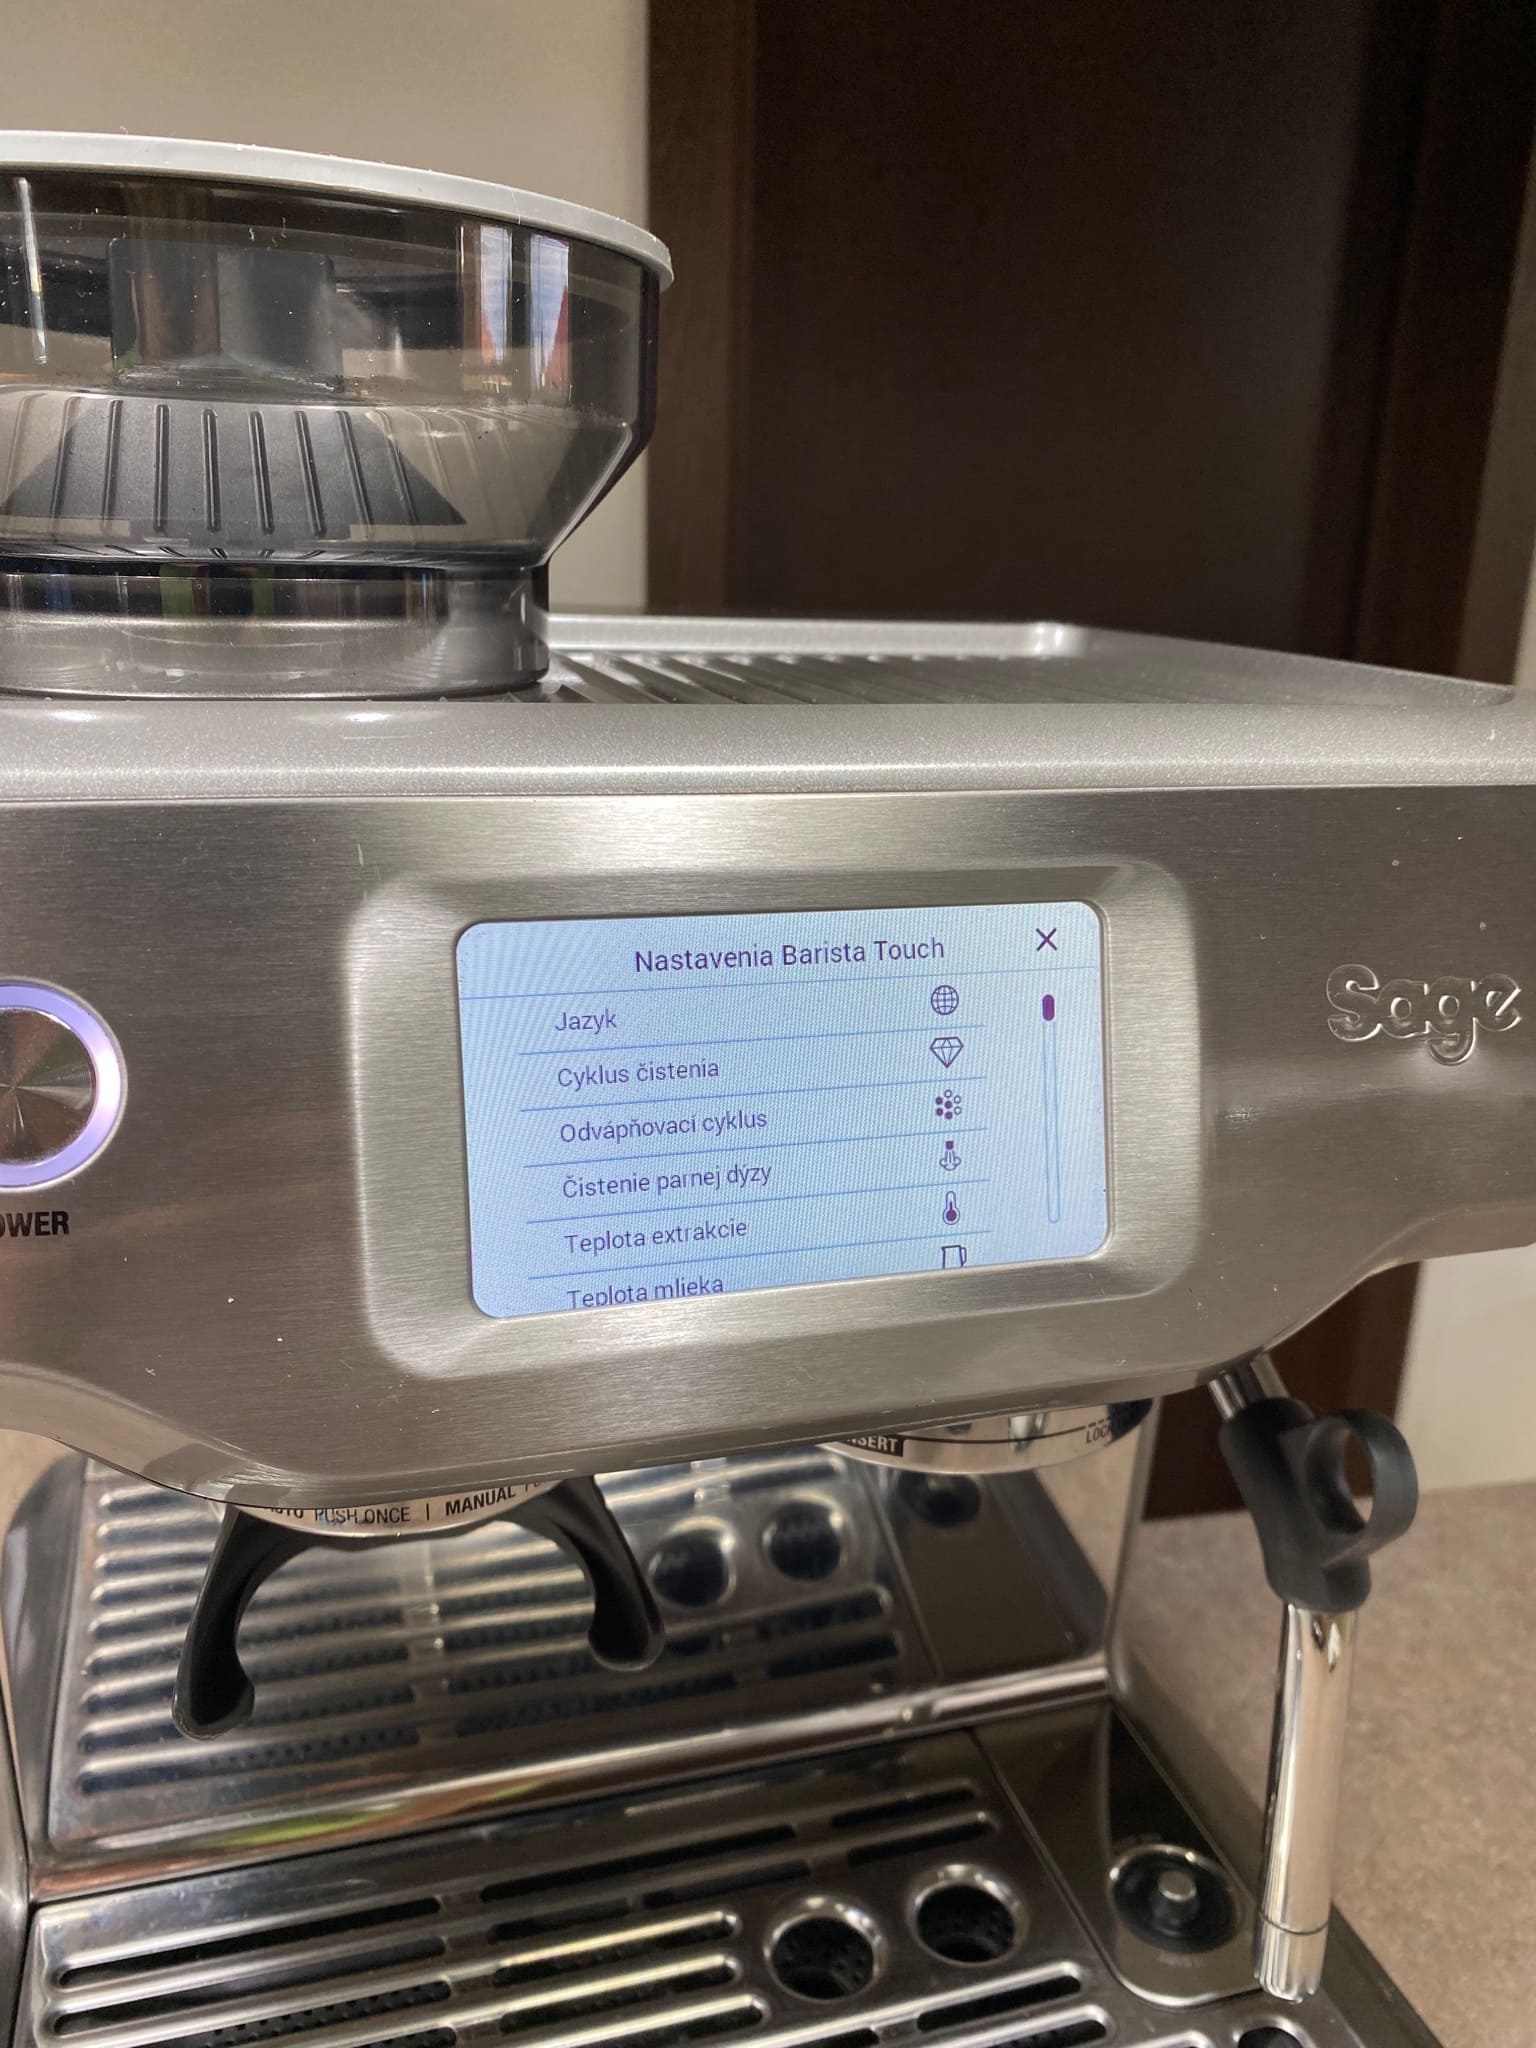 The interactive touchscreen and preprogrammed recipes on Barista Touch